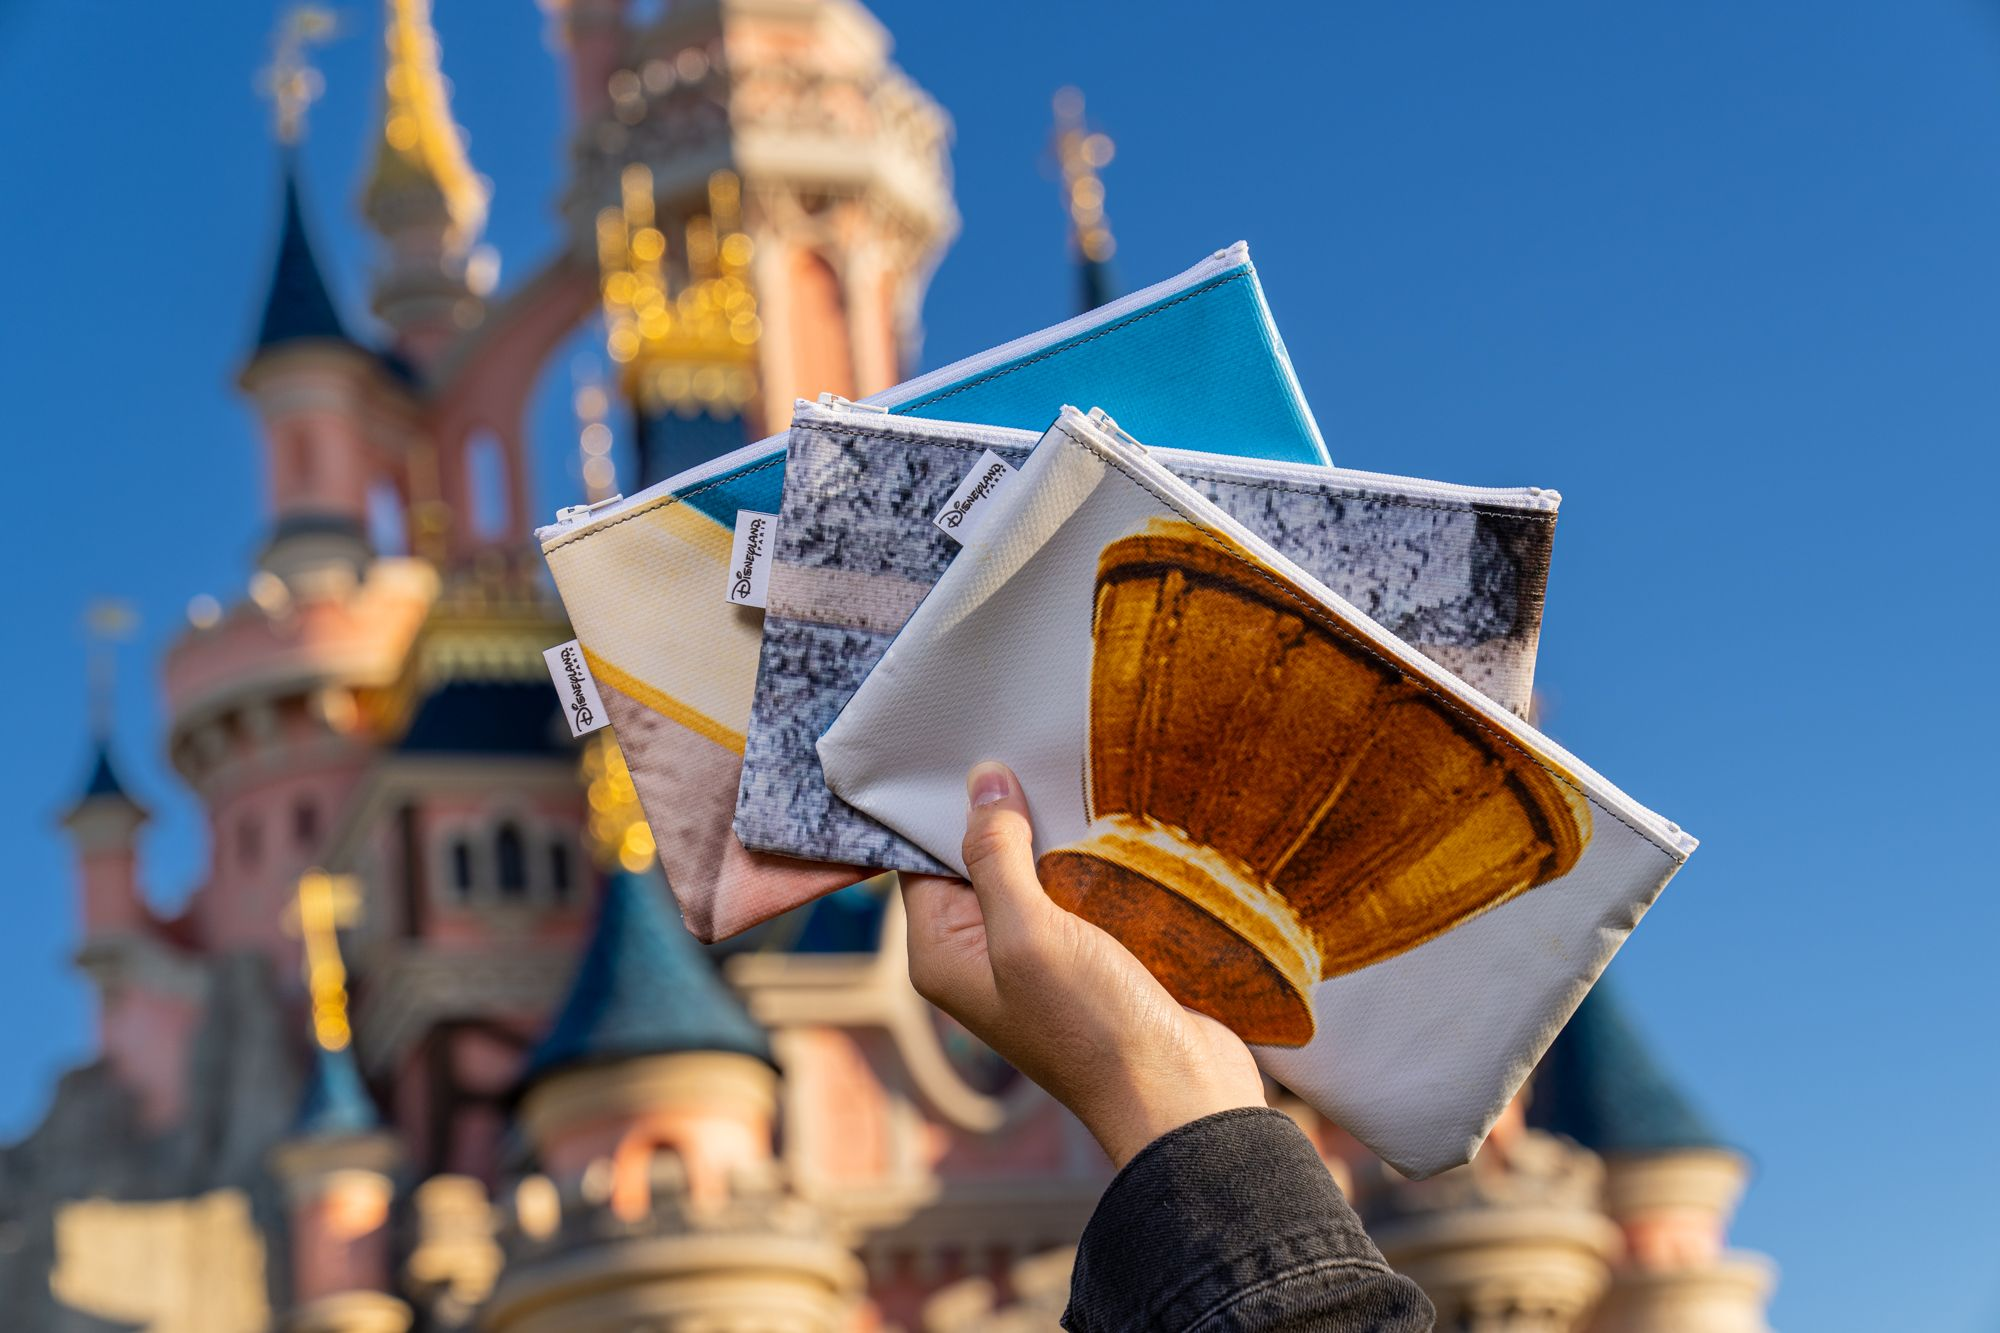 Disneyland Paris to Release Products Made From the Sleeping Beauty Castle Tarpaulin on September 9th!